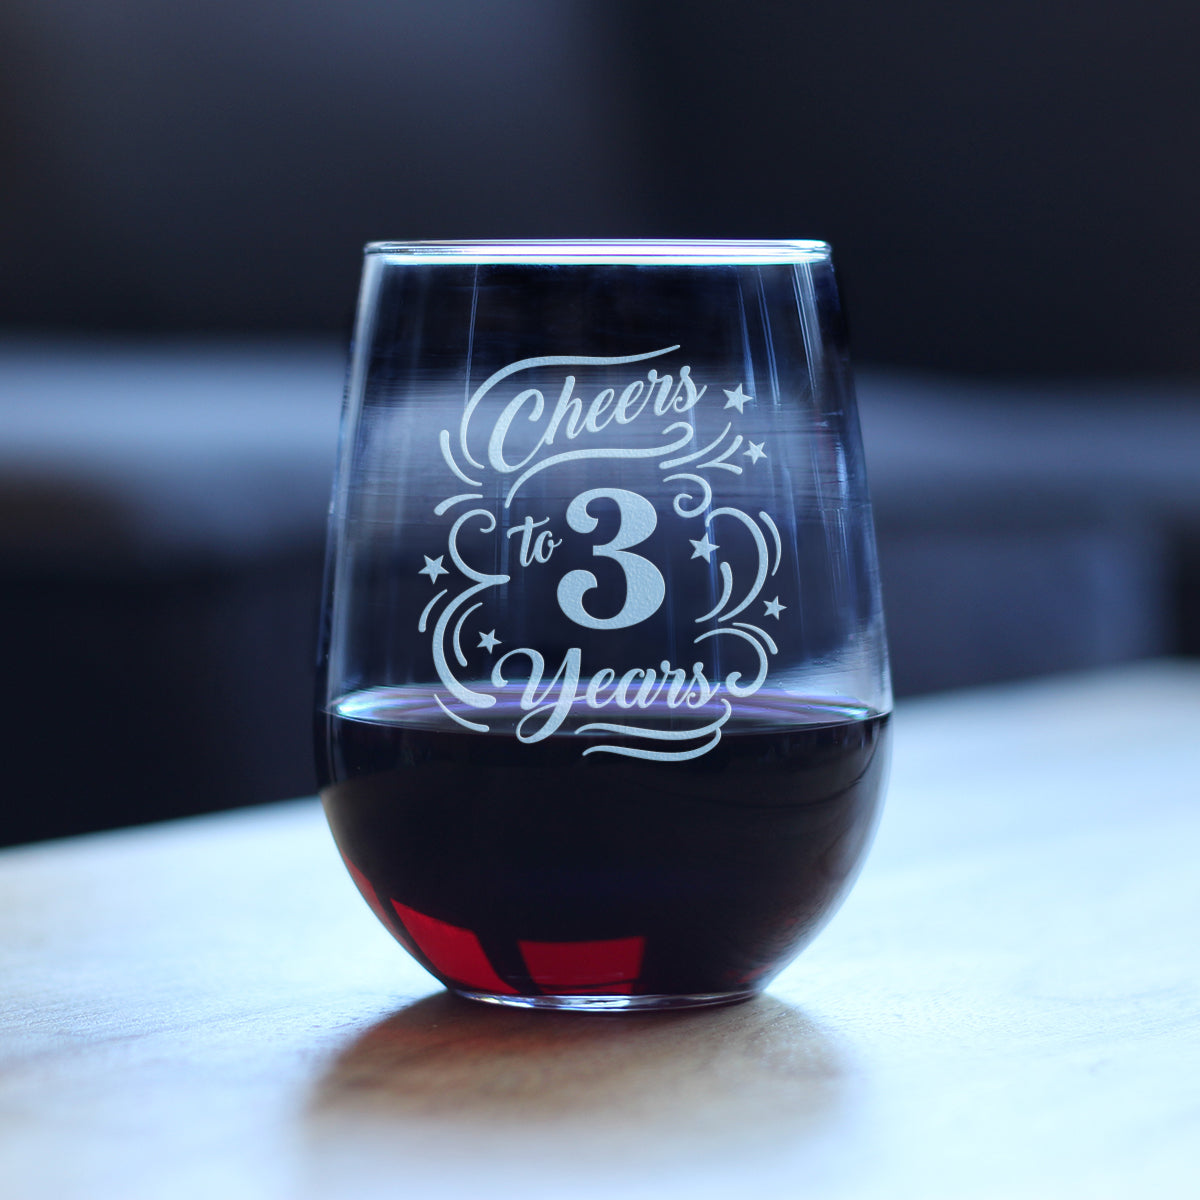 Cheers to 3 Years - Stemless Wine Glass Gifts for Women &amp; Men - 3rd Anniversary Party Decor - Large 17 Oz Glasses